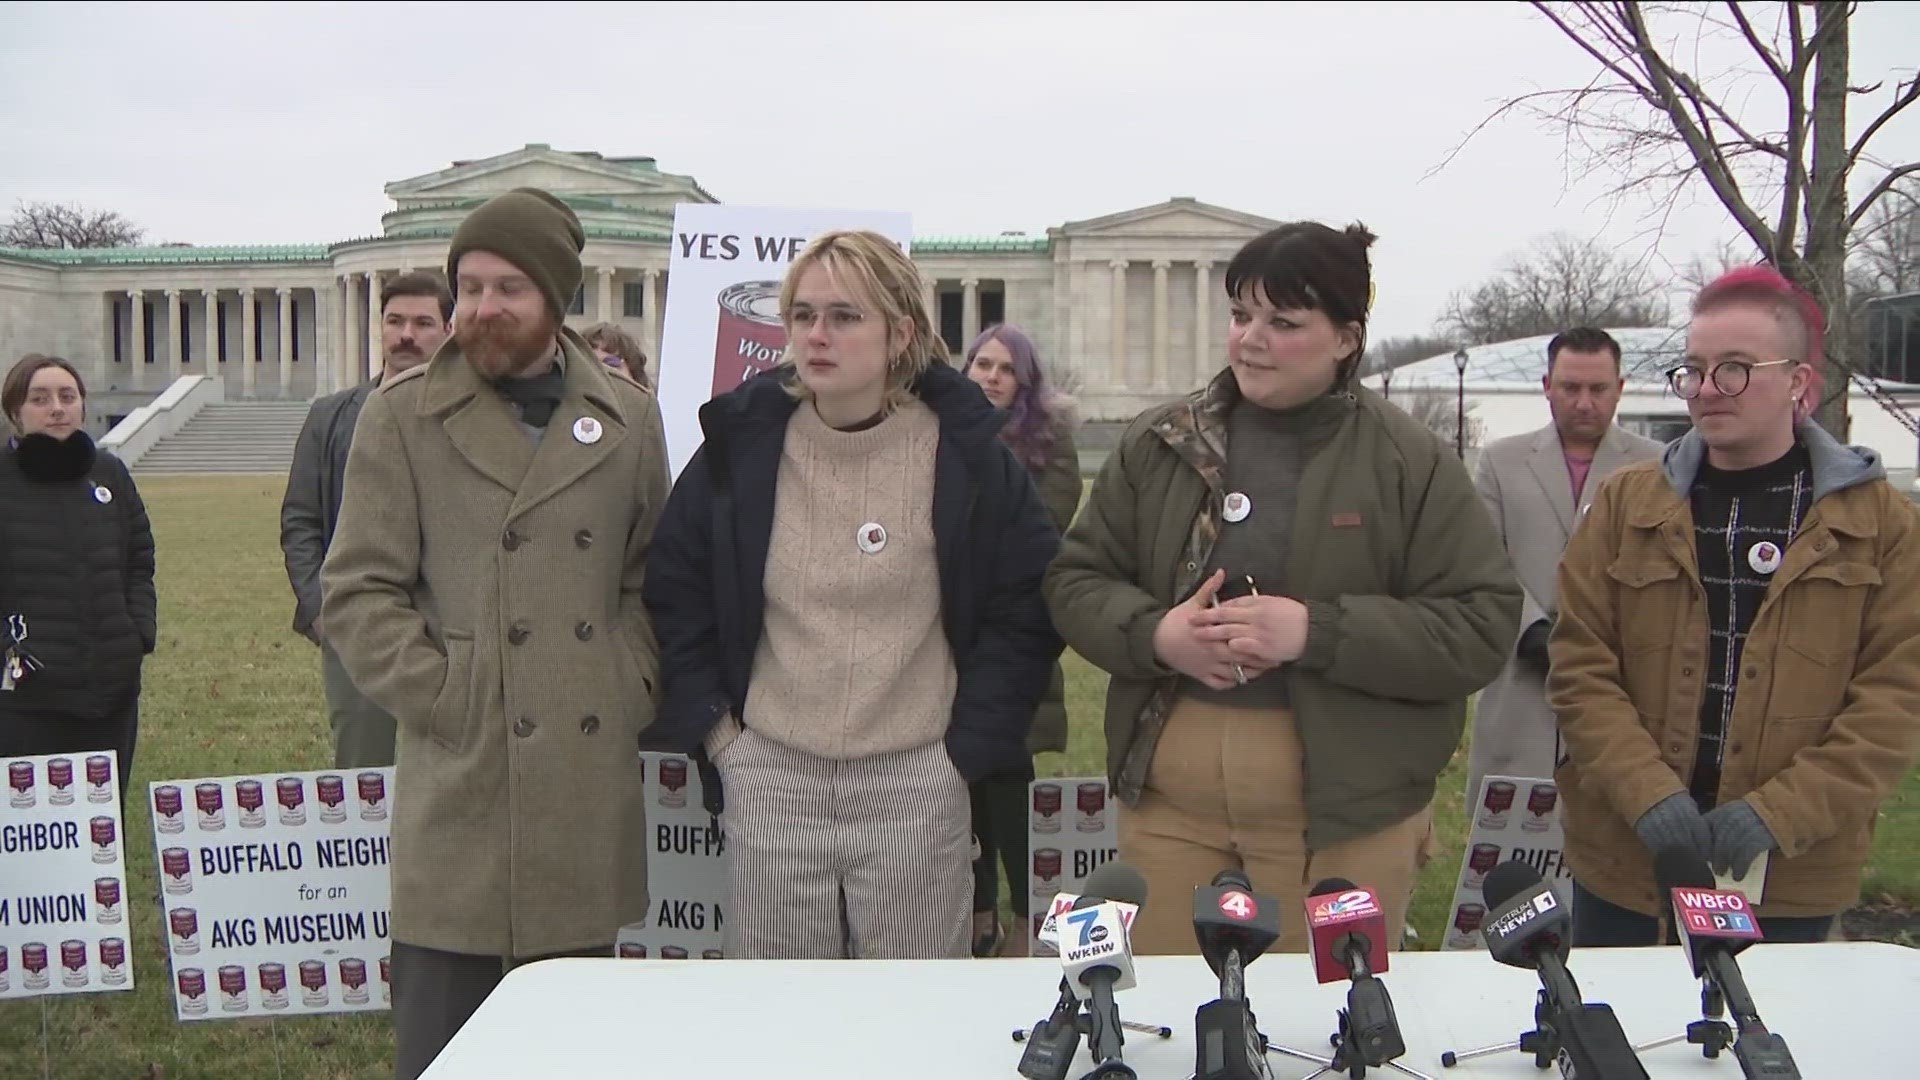 The AKG Museum employees say they have been at odds with leadership since Nov. 16th.